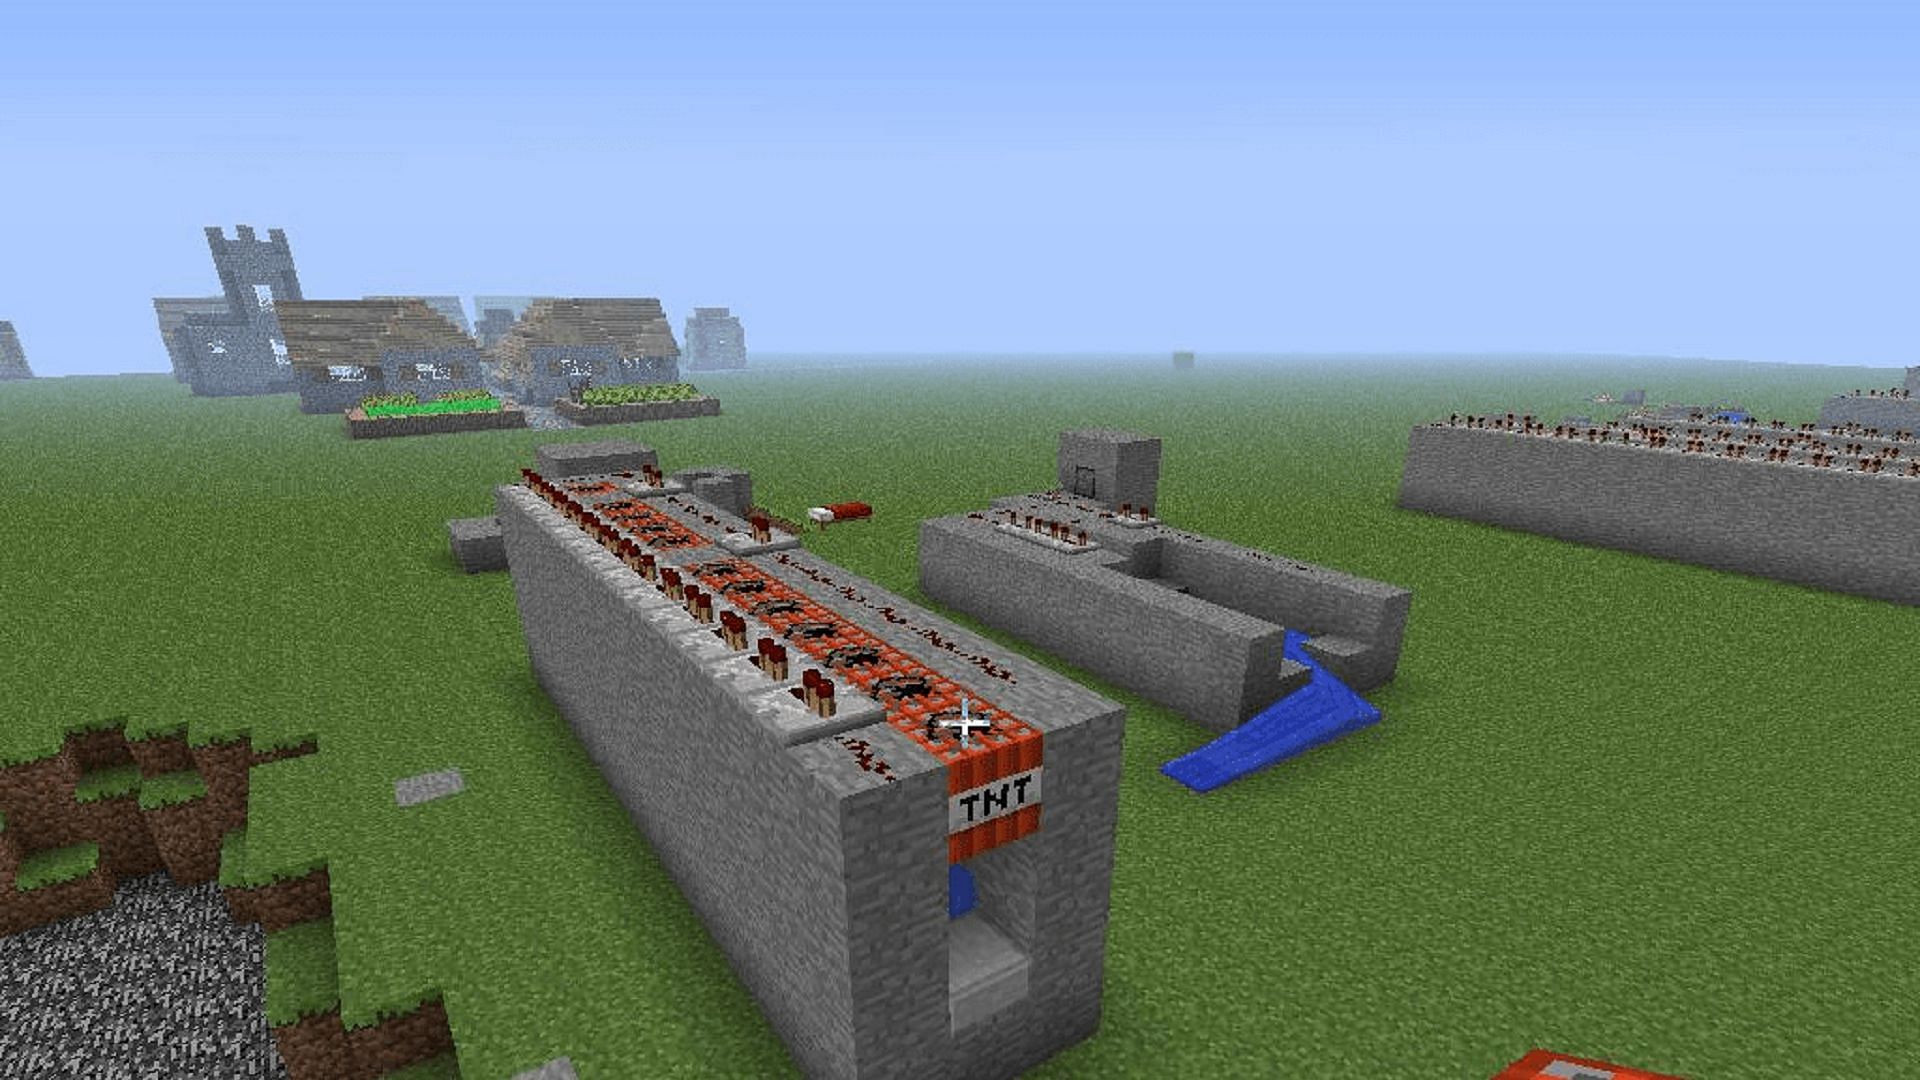 TNT cannons are quite popular, particularly on Minecraft PvP servers (Image via Electronicz/Instructables)